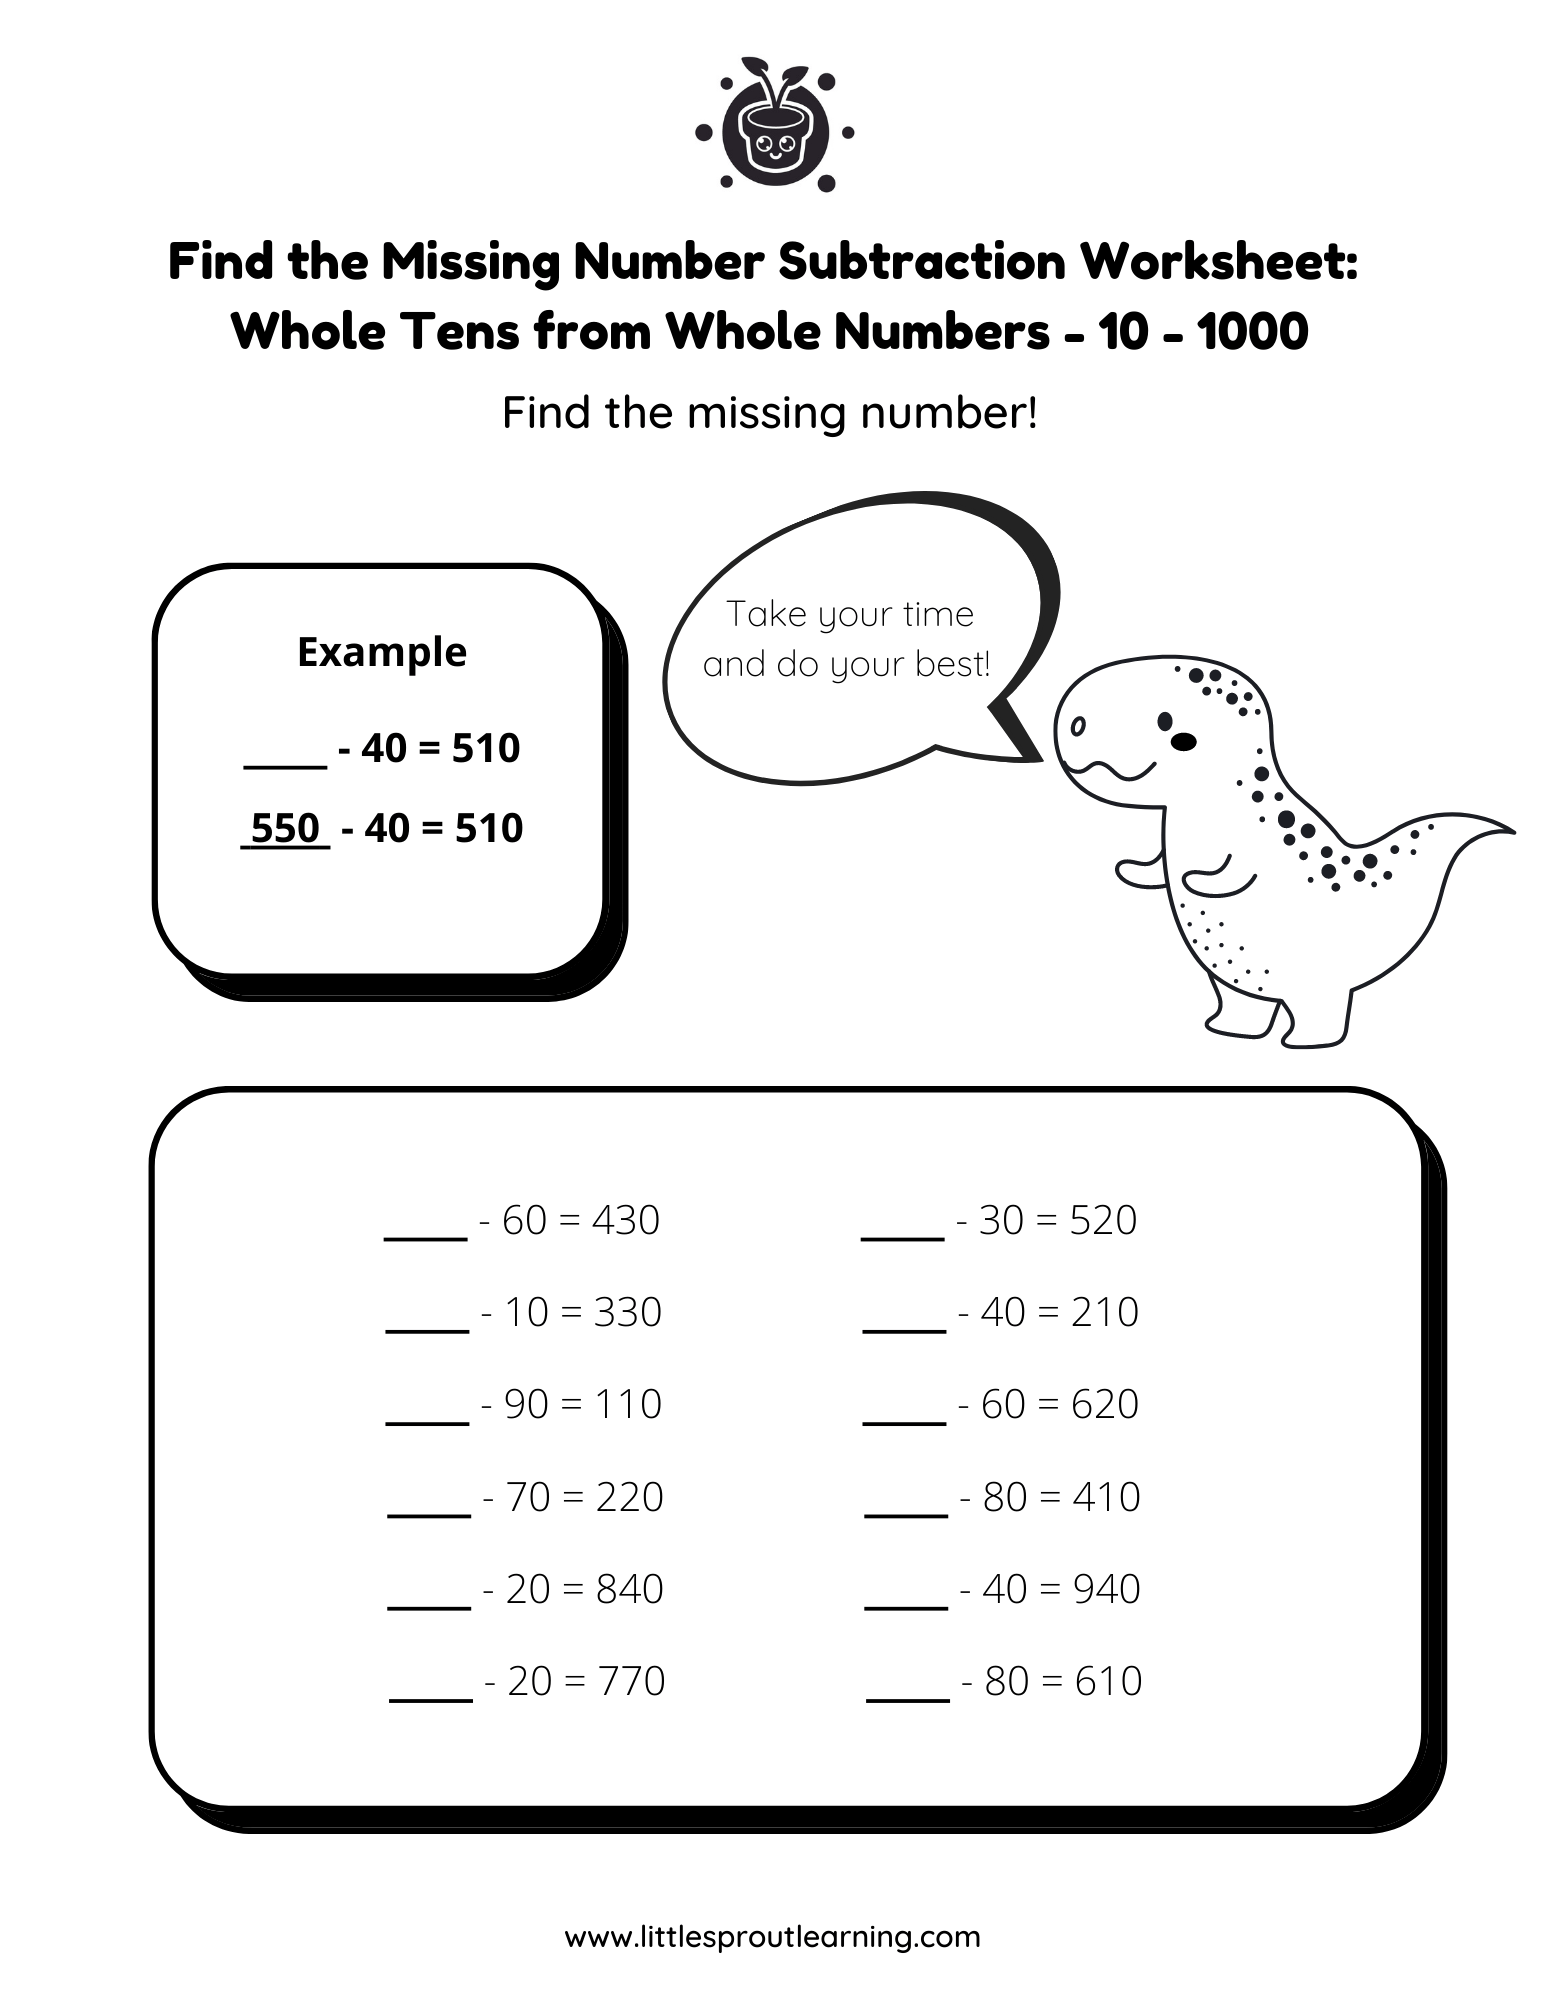 Find the Missing Number Subtraction Worksheet – Whole Tens from Whole Numbers